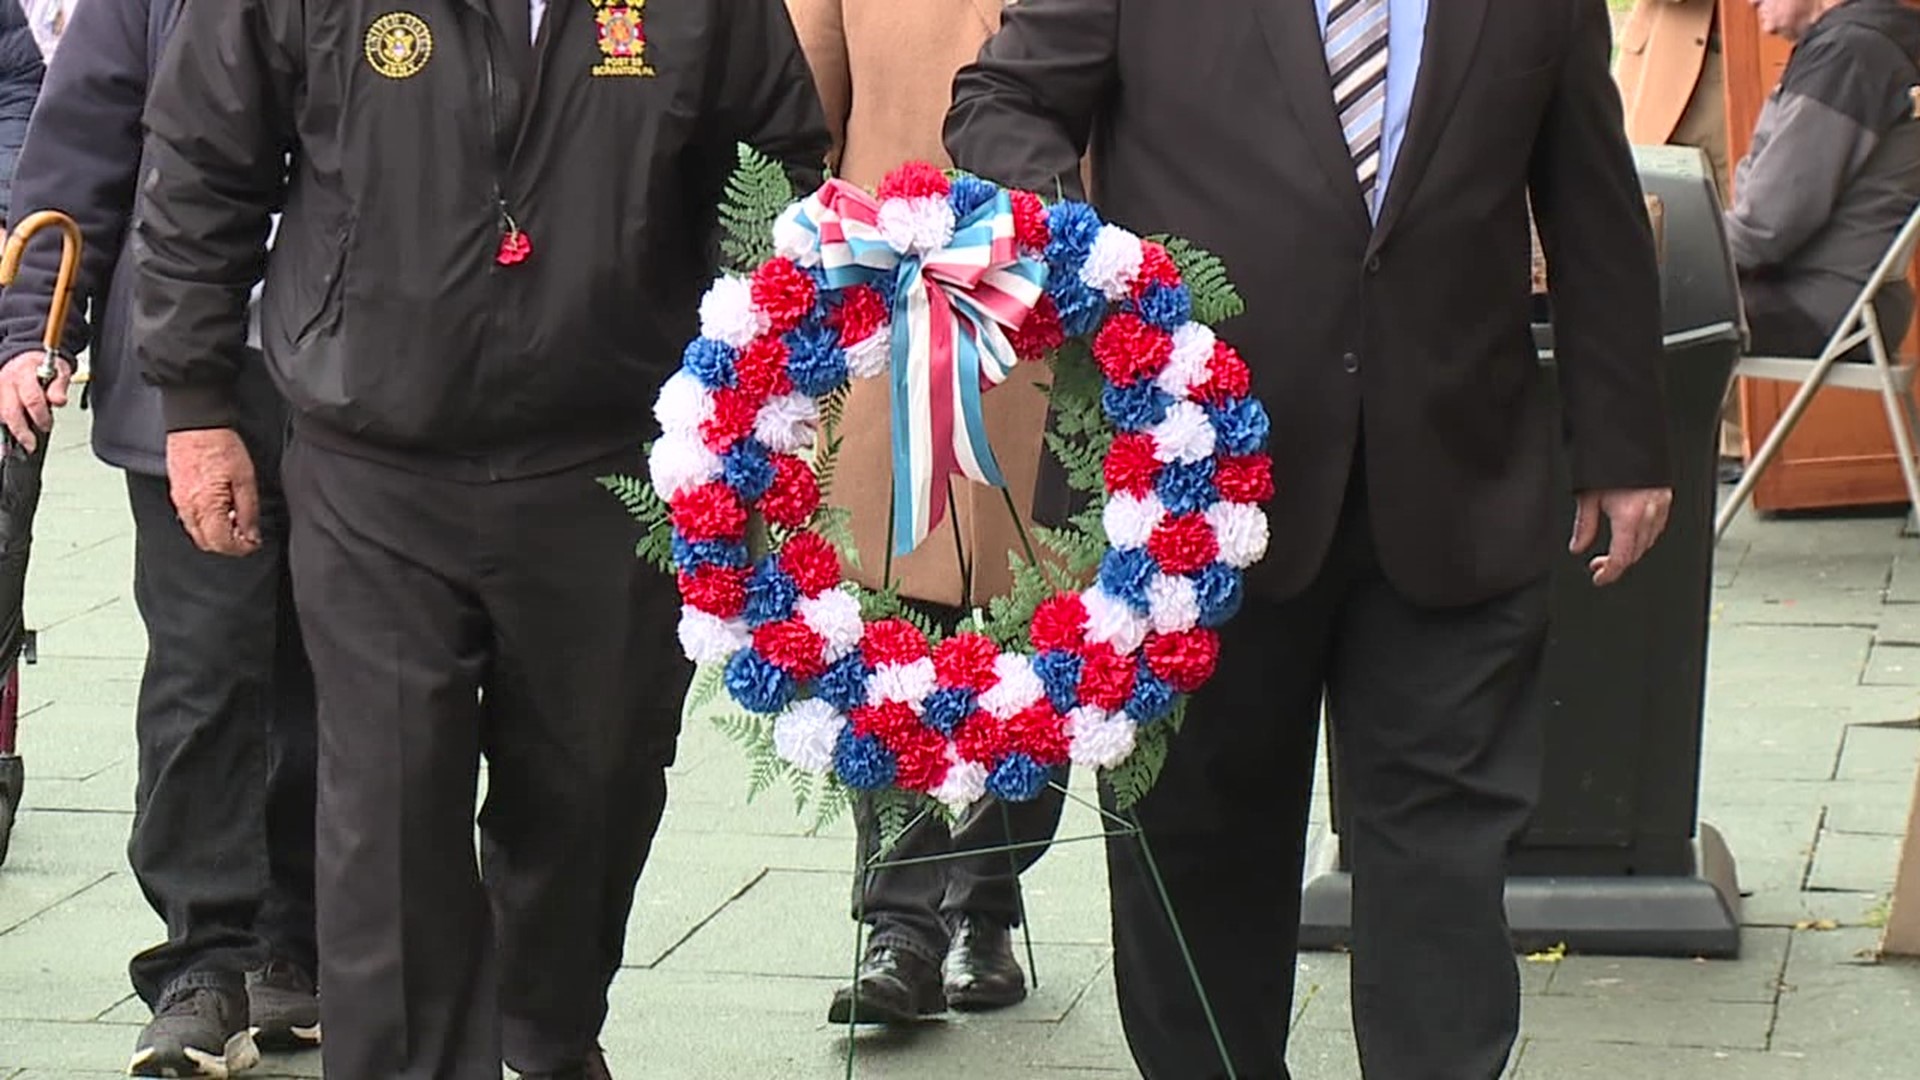 The 81st anniversary of the attack on Pearl Harbor was commemorated Wednesday morning in Scranton.